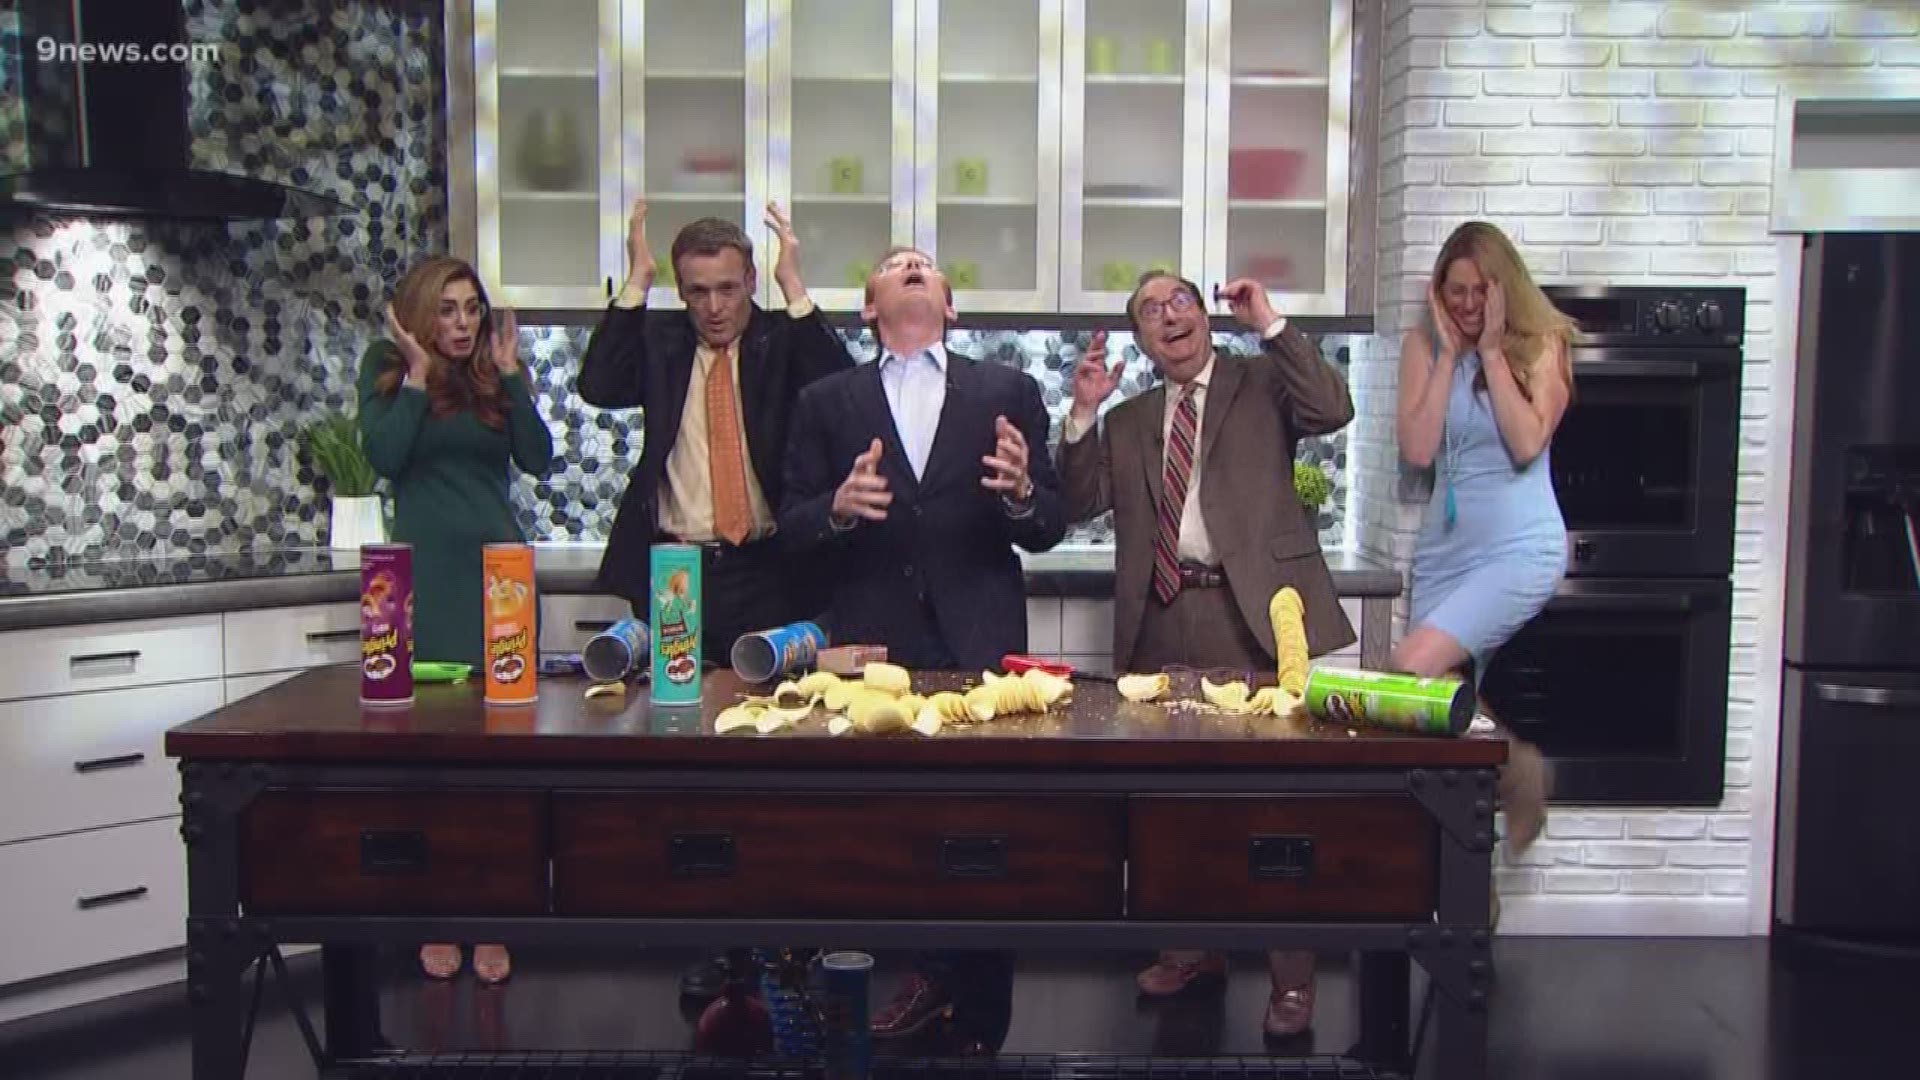 When Steve Spangler stops by the 9NEWS studio things tend to explode. Today was no exception, he showed us how to blow up some potato chips, in a safe way of course.